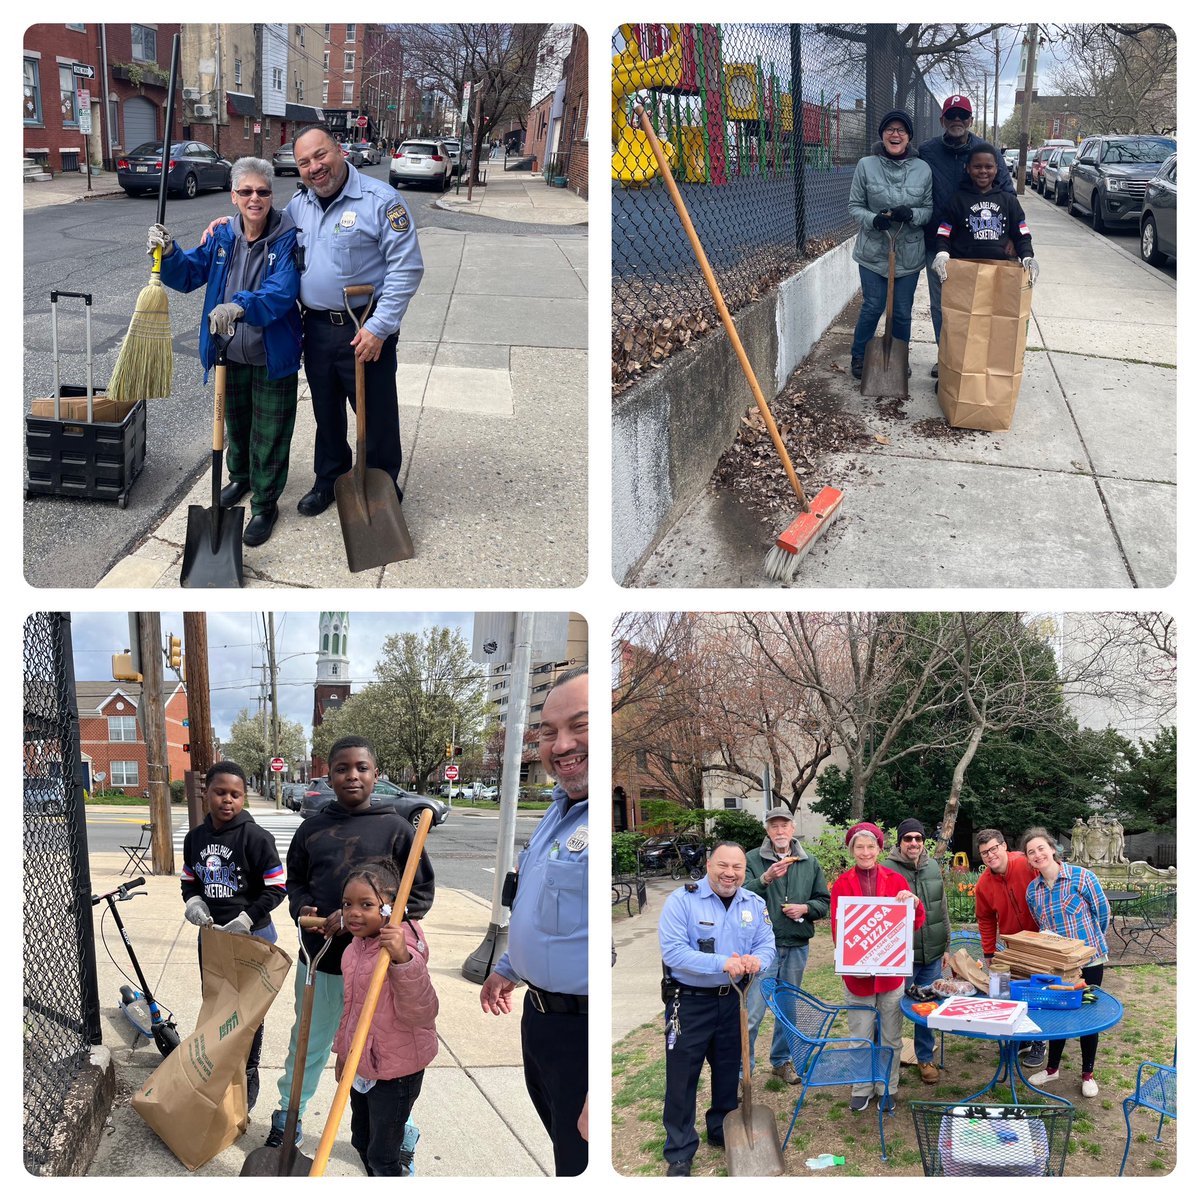 Spring Cleaning today at Sacks Playground, Palumbo Rec Center, and Cianfrani Park. Thank you @PPDSouthStreet and neighbors for helping keep our parks and neighborhoods clean!